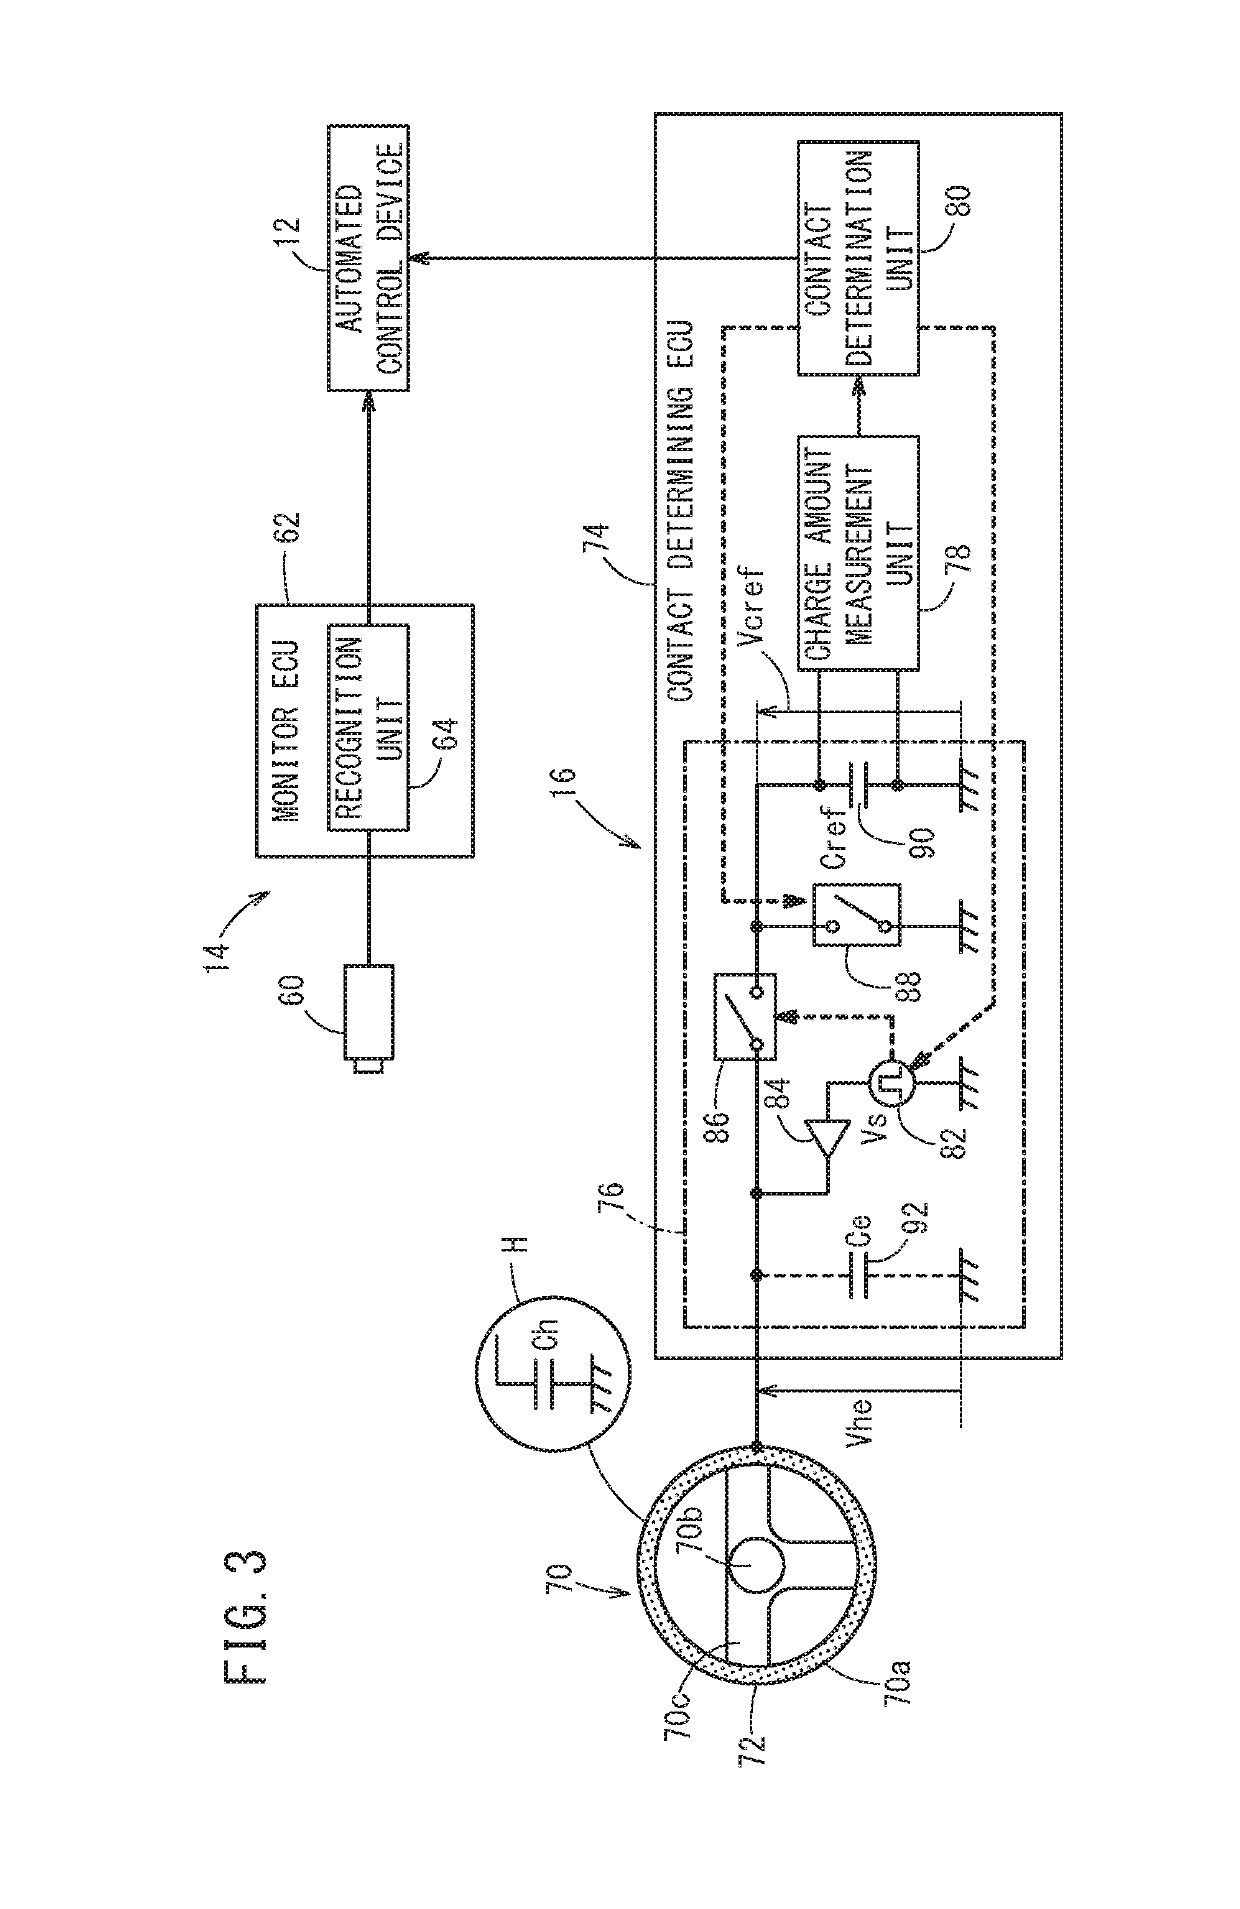 Automatic driving control device